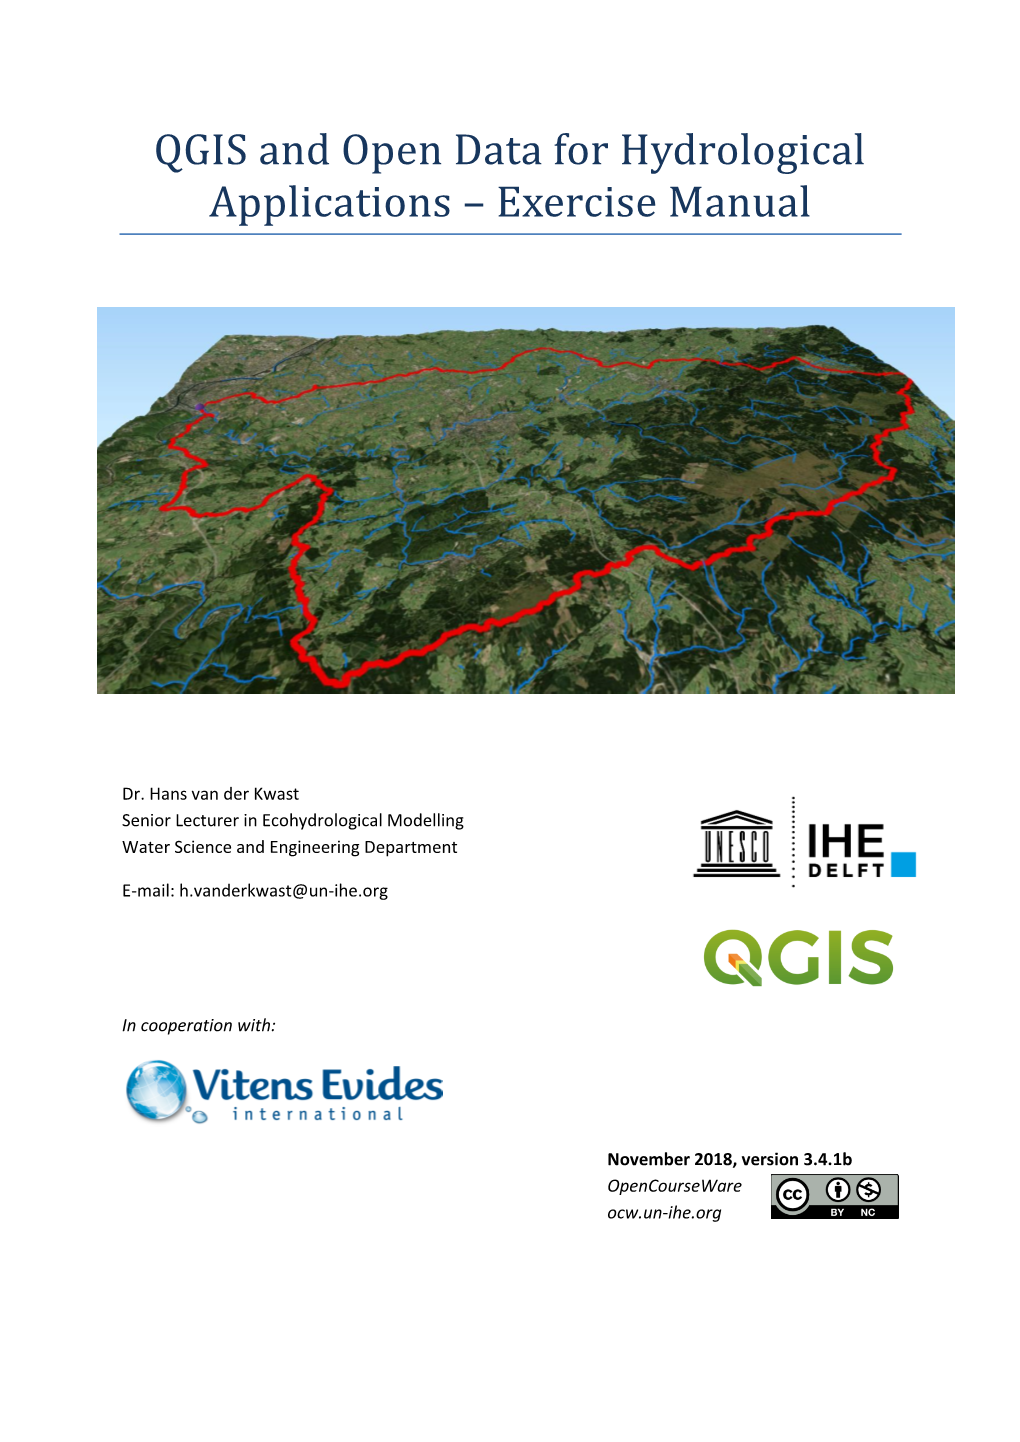 QGIS and Open Data for Hydrological Applications – Exercise Manual